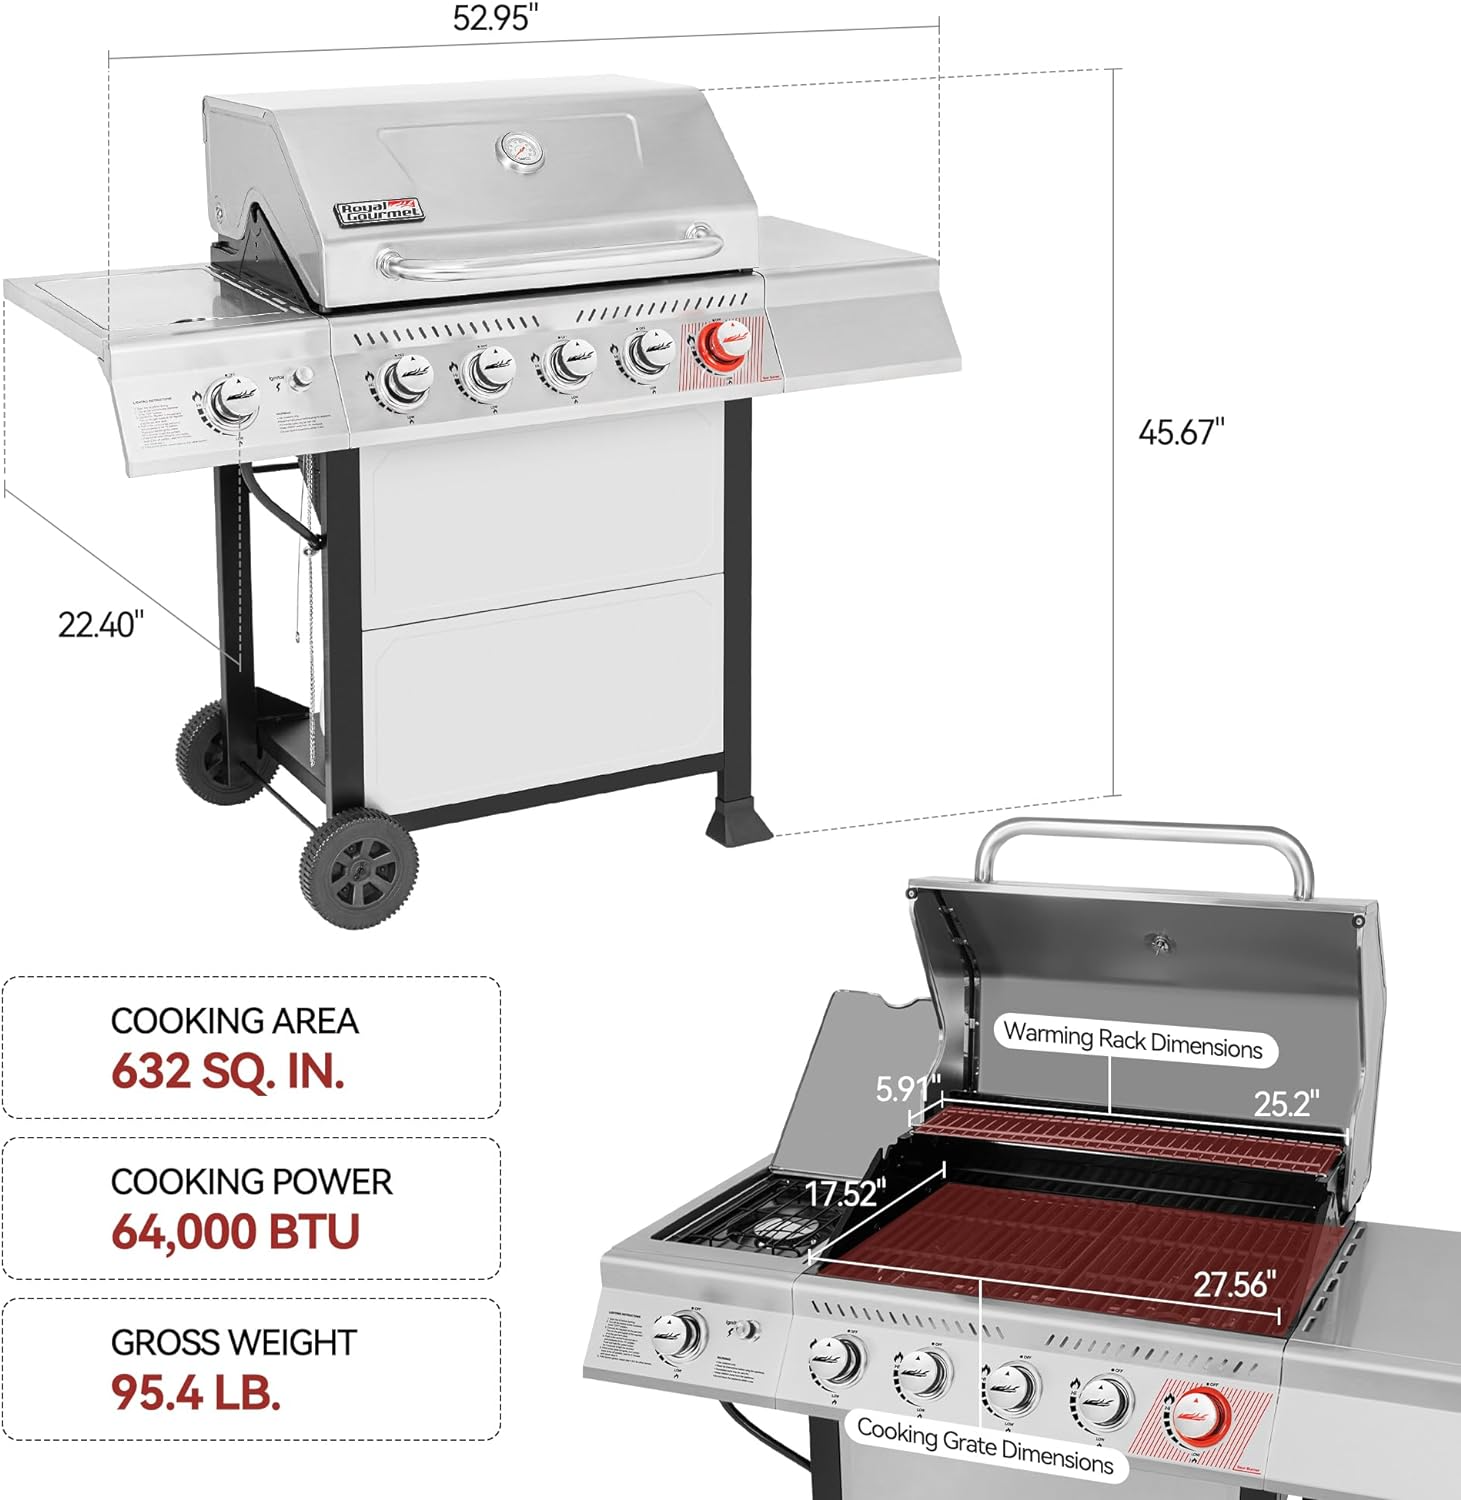 Royal Gourmet GA5401T 5-Burner BBQ Propane Grill with Sear Burner and Side Burner, Stainless Steel Barbecue Gas Grill for Outdoor Patio Garden Picnic Backyard Cooking, 64,000 BTU, Silver - Barbecue Whizz...Watch My Smoke!